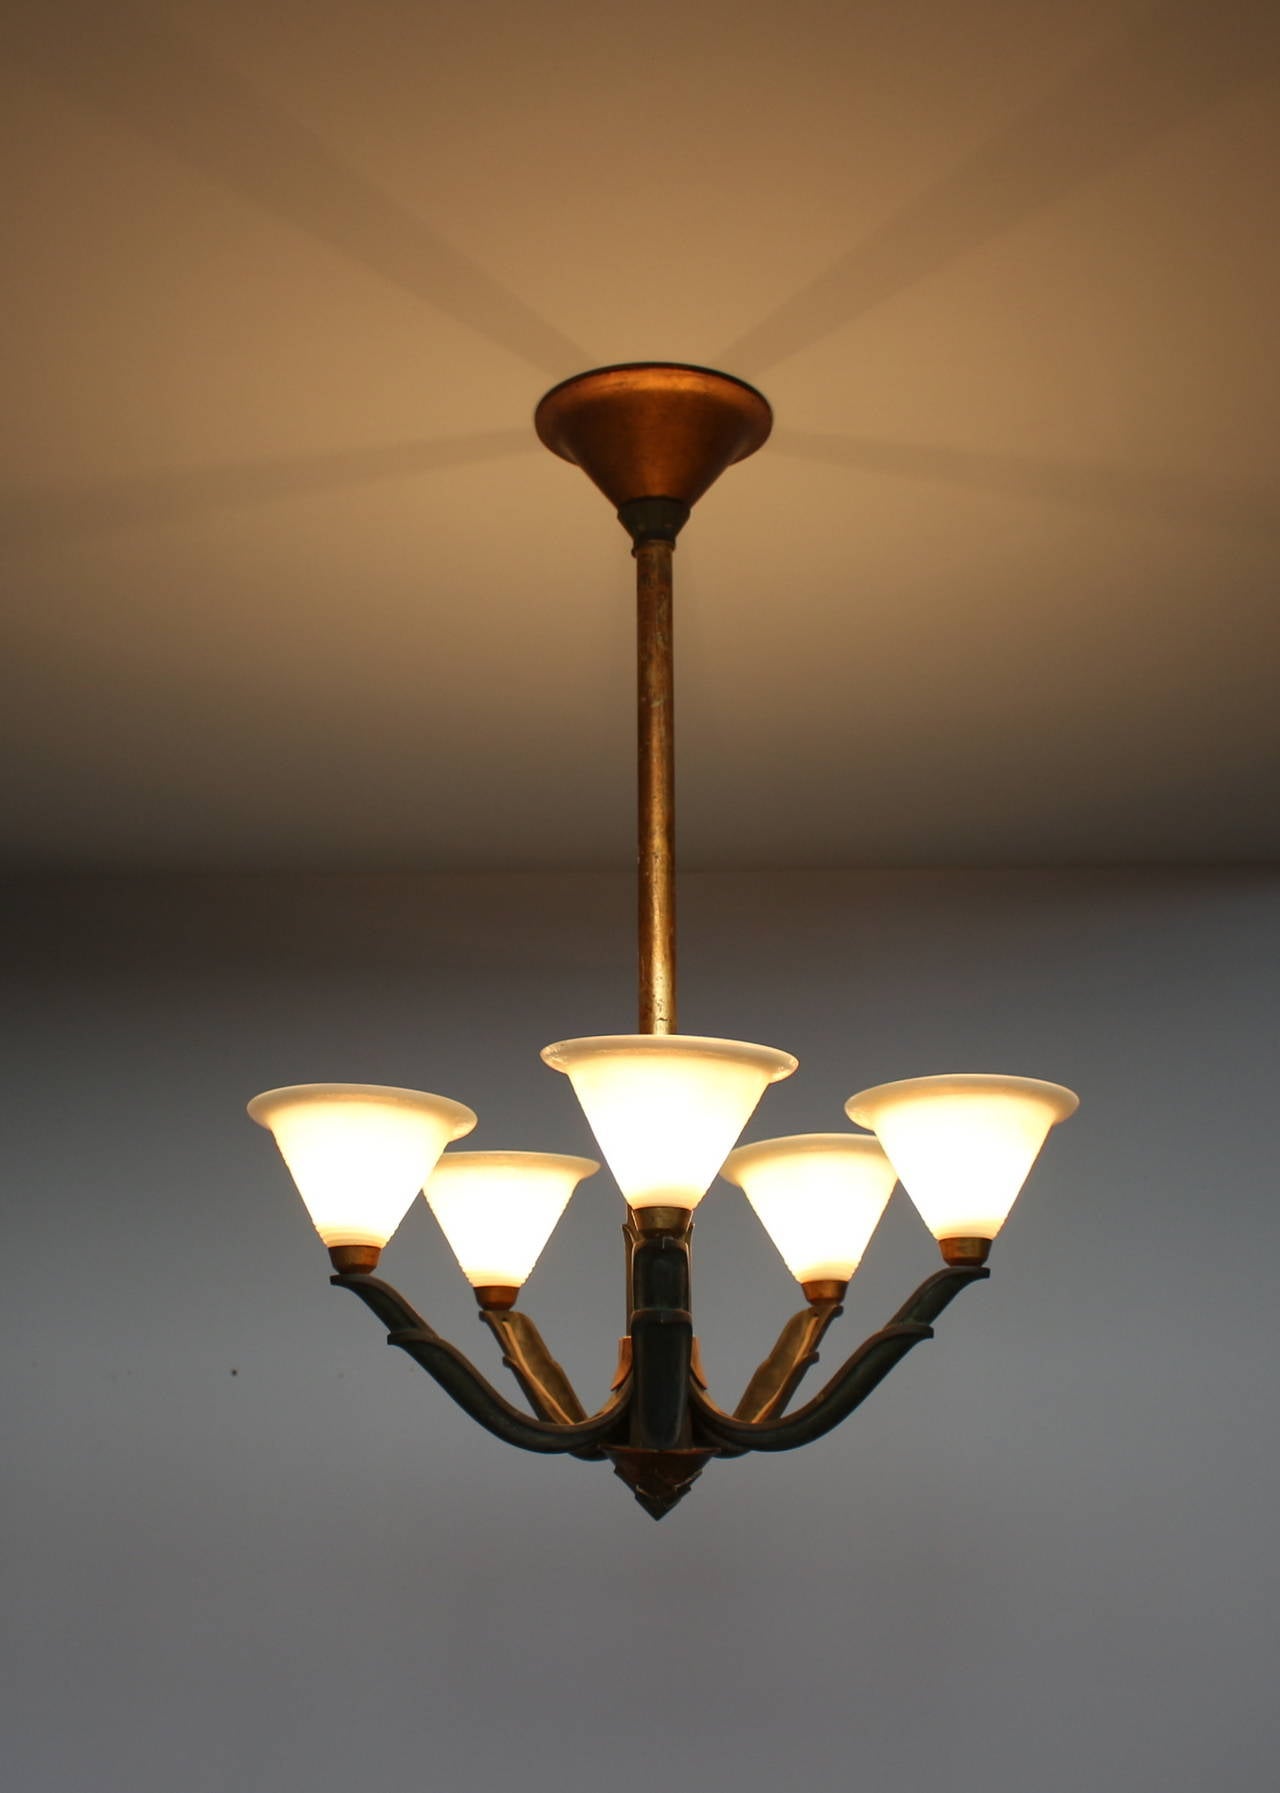 Fine French Art Deco five patina and gilded bronze arms with daum glass shades by P. Fargette.
US re-wired (5 candelabra bulbs - up to 300 watts total)